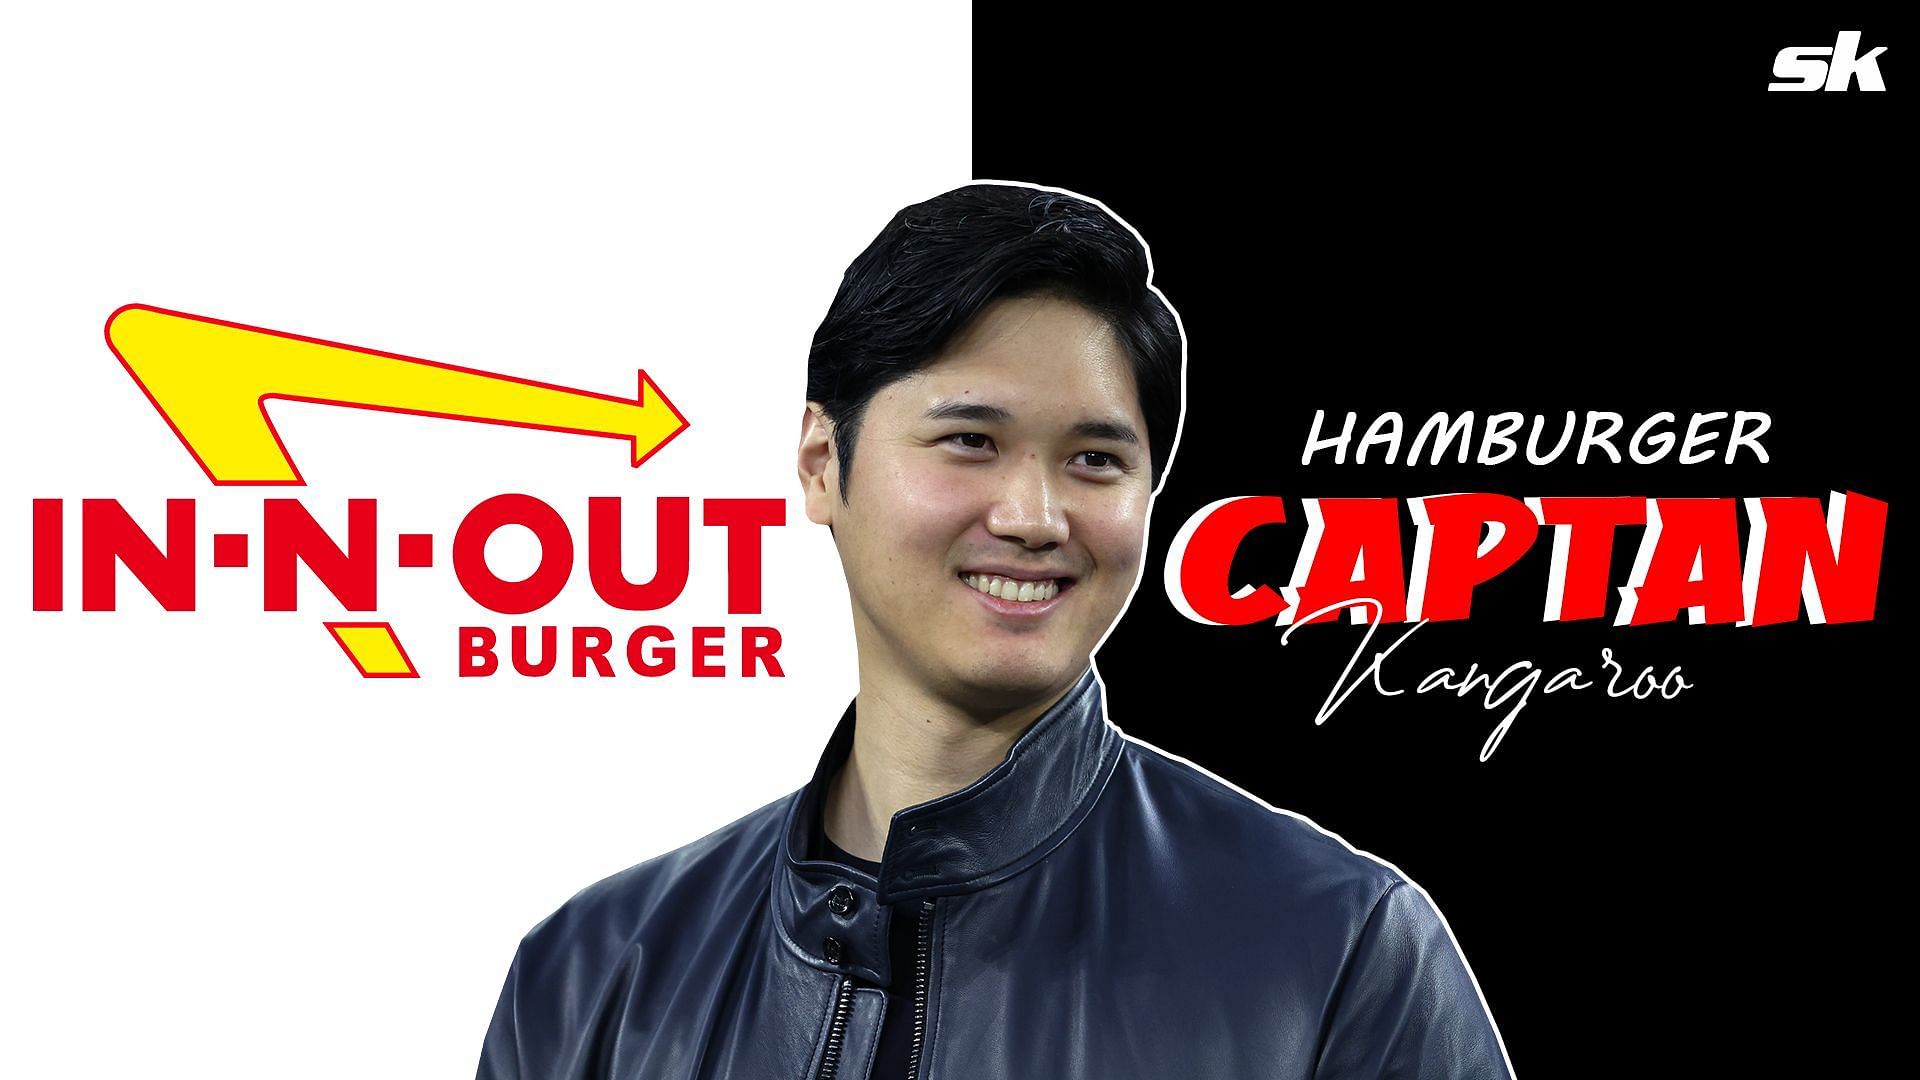 &quot;Captain Kangaroo!&quot; - When Shohei Ohtani gave preference to local fast food over renowned American joint